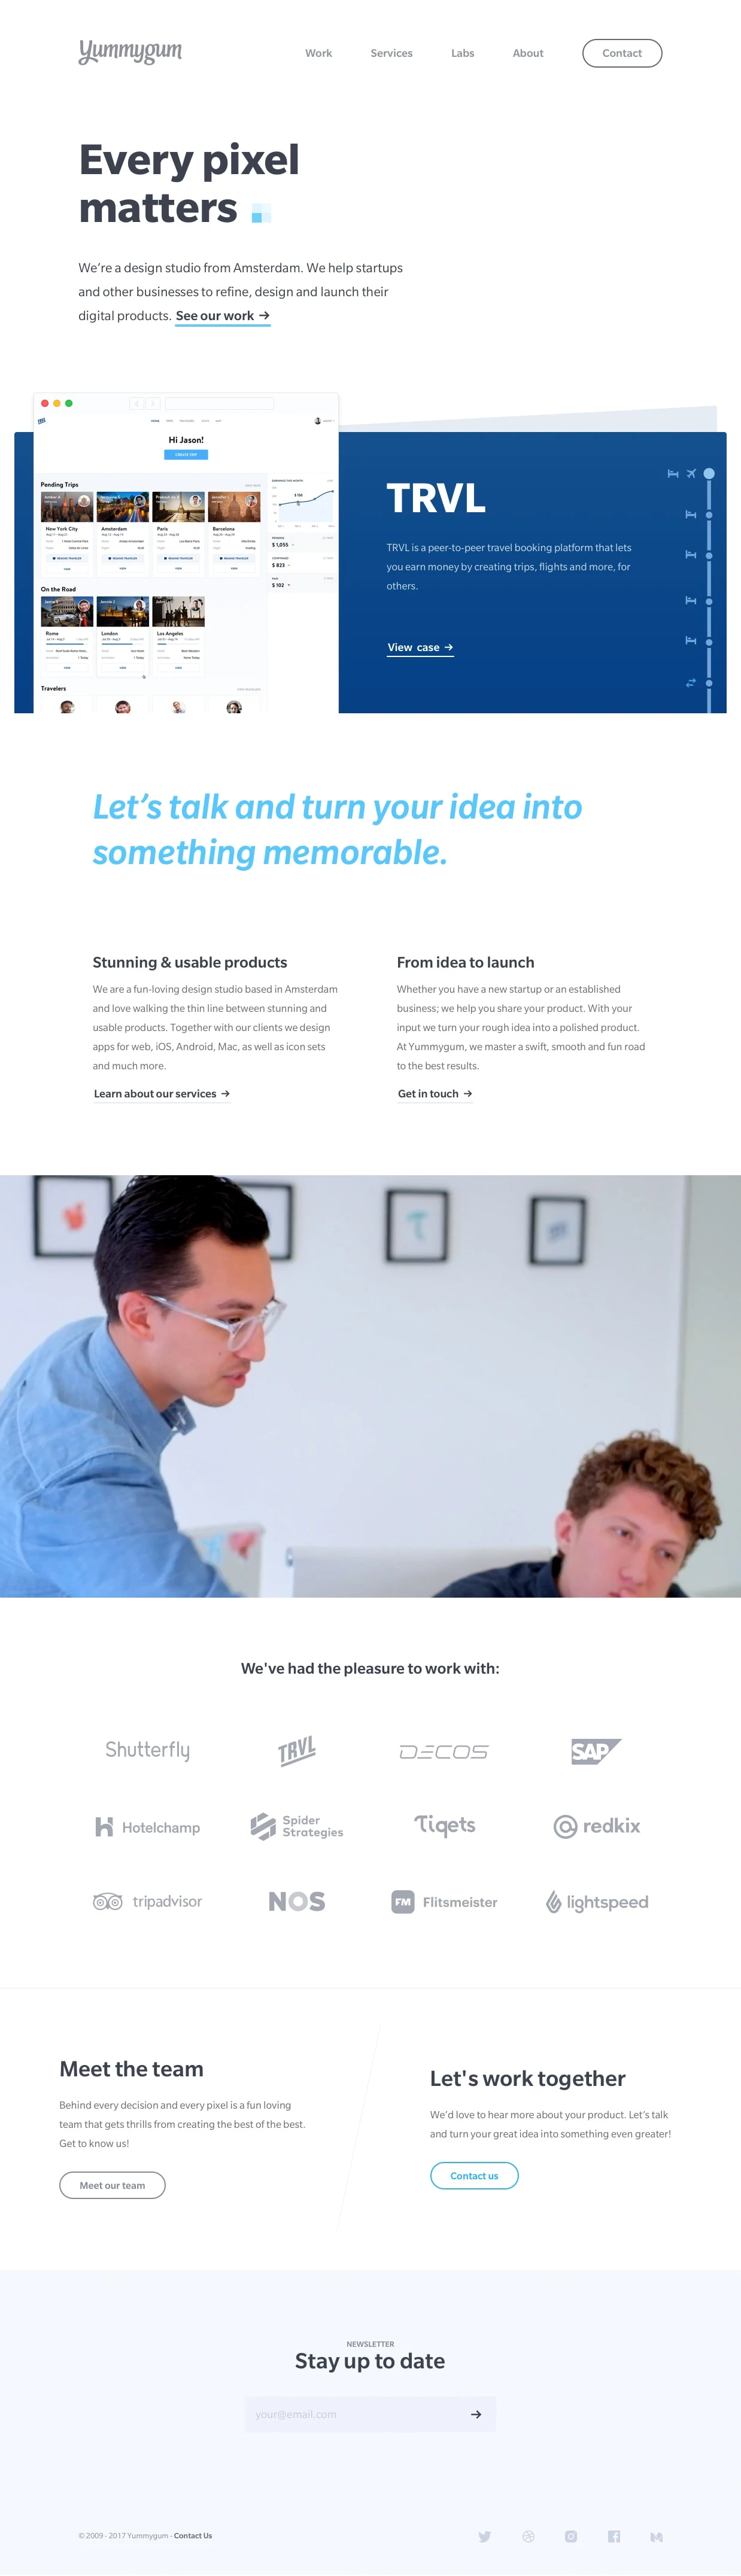 Yummygum Landing Page Example: We’re a design studio from Amsterdam. We help startups and other businesses to refine, design and launch their digital products.